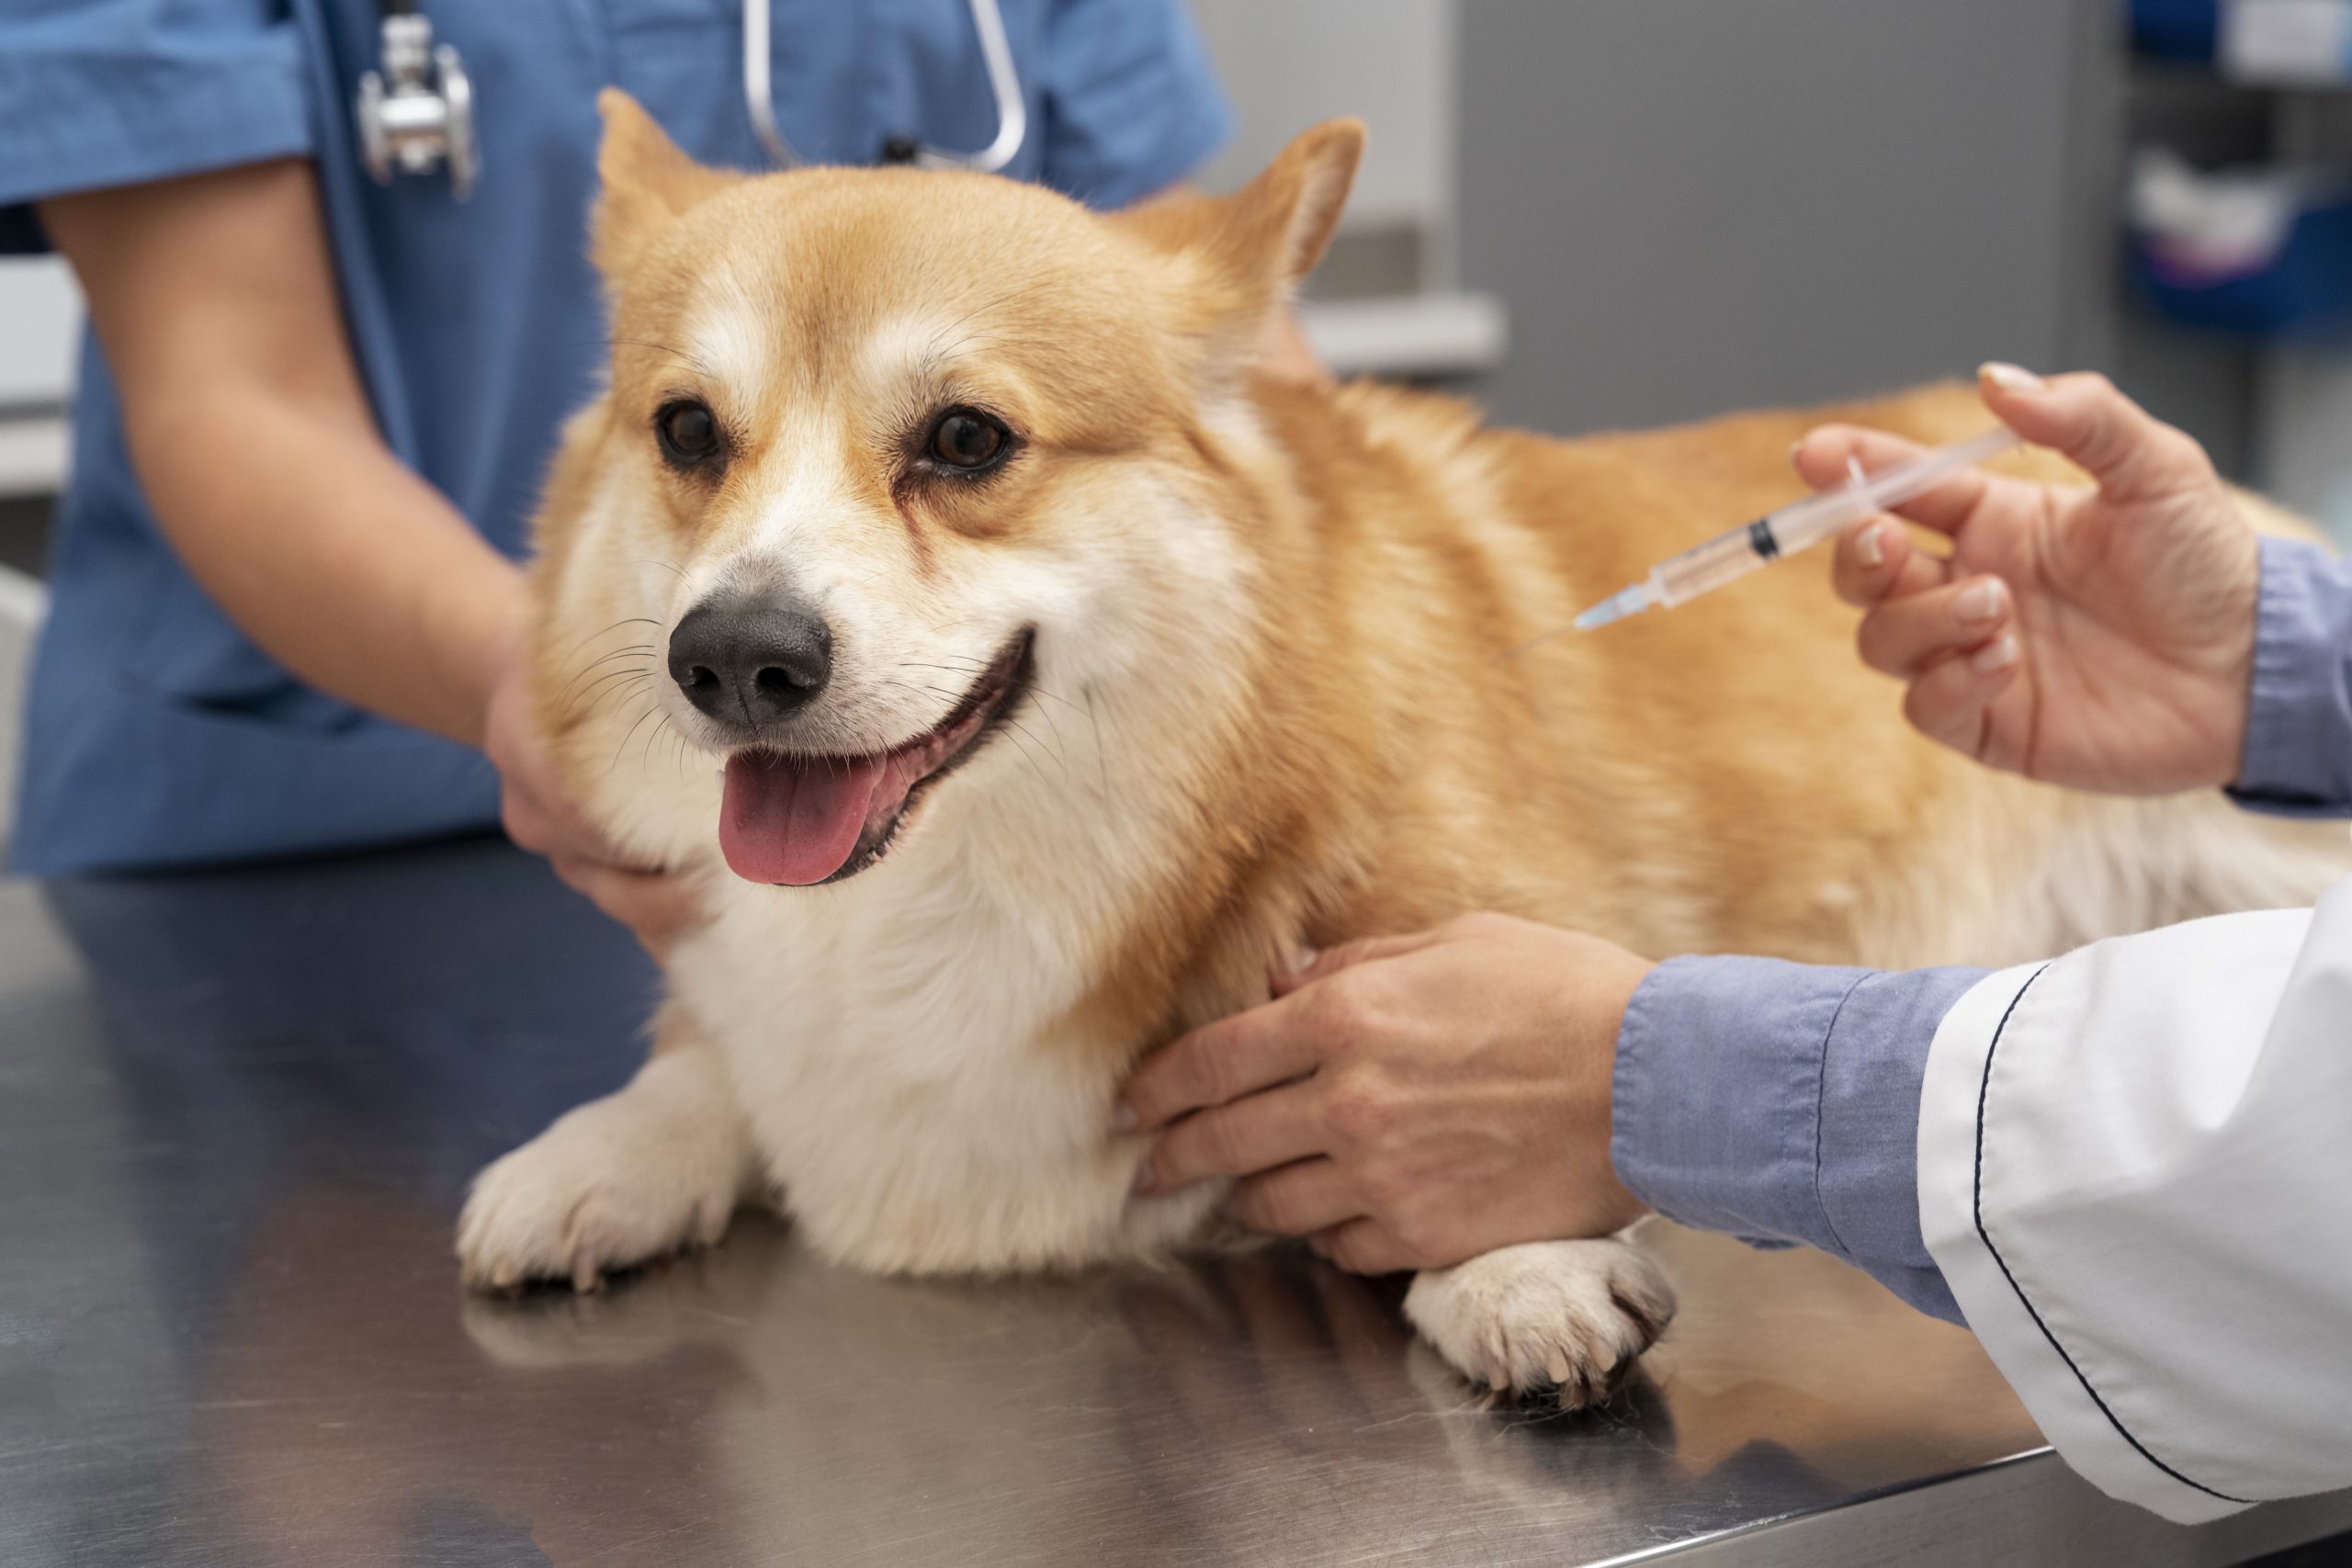 The Lepto vaccine helps to prevent pets from catching the leptospirosis vaccine.